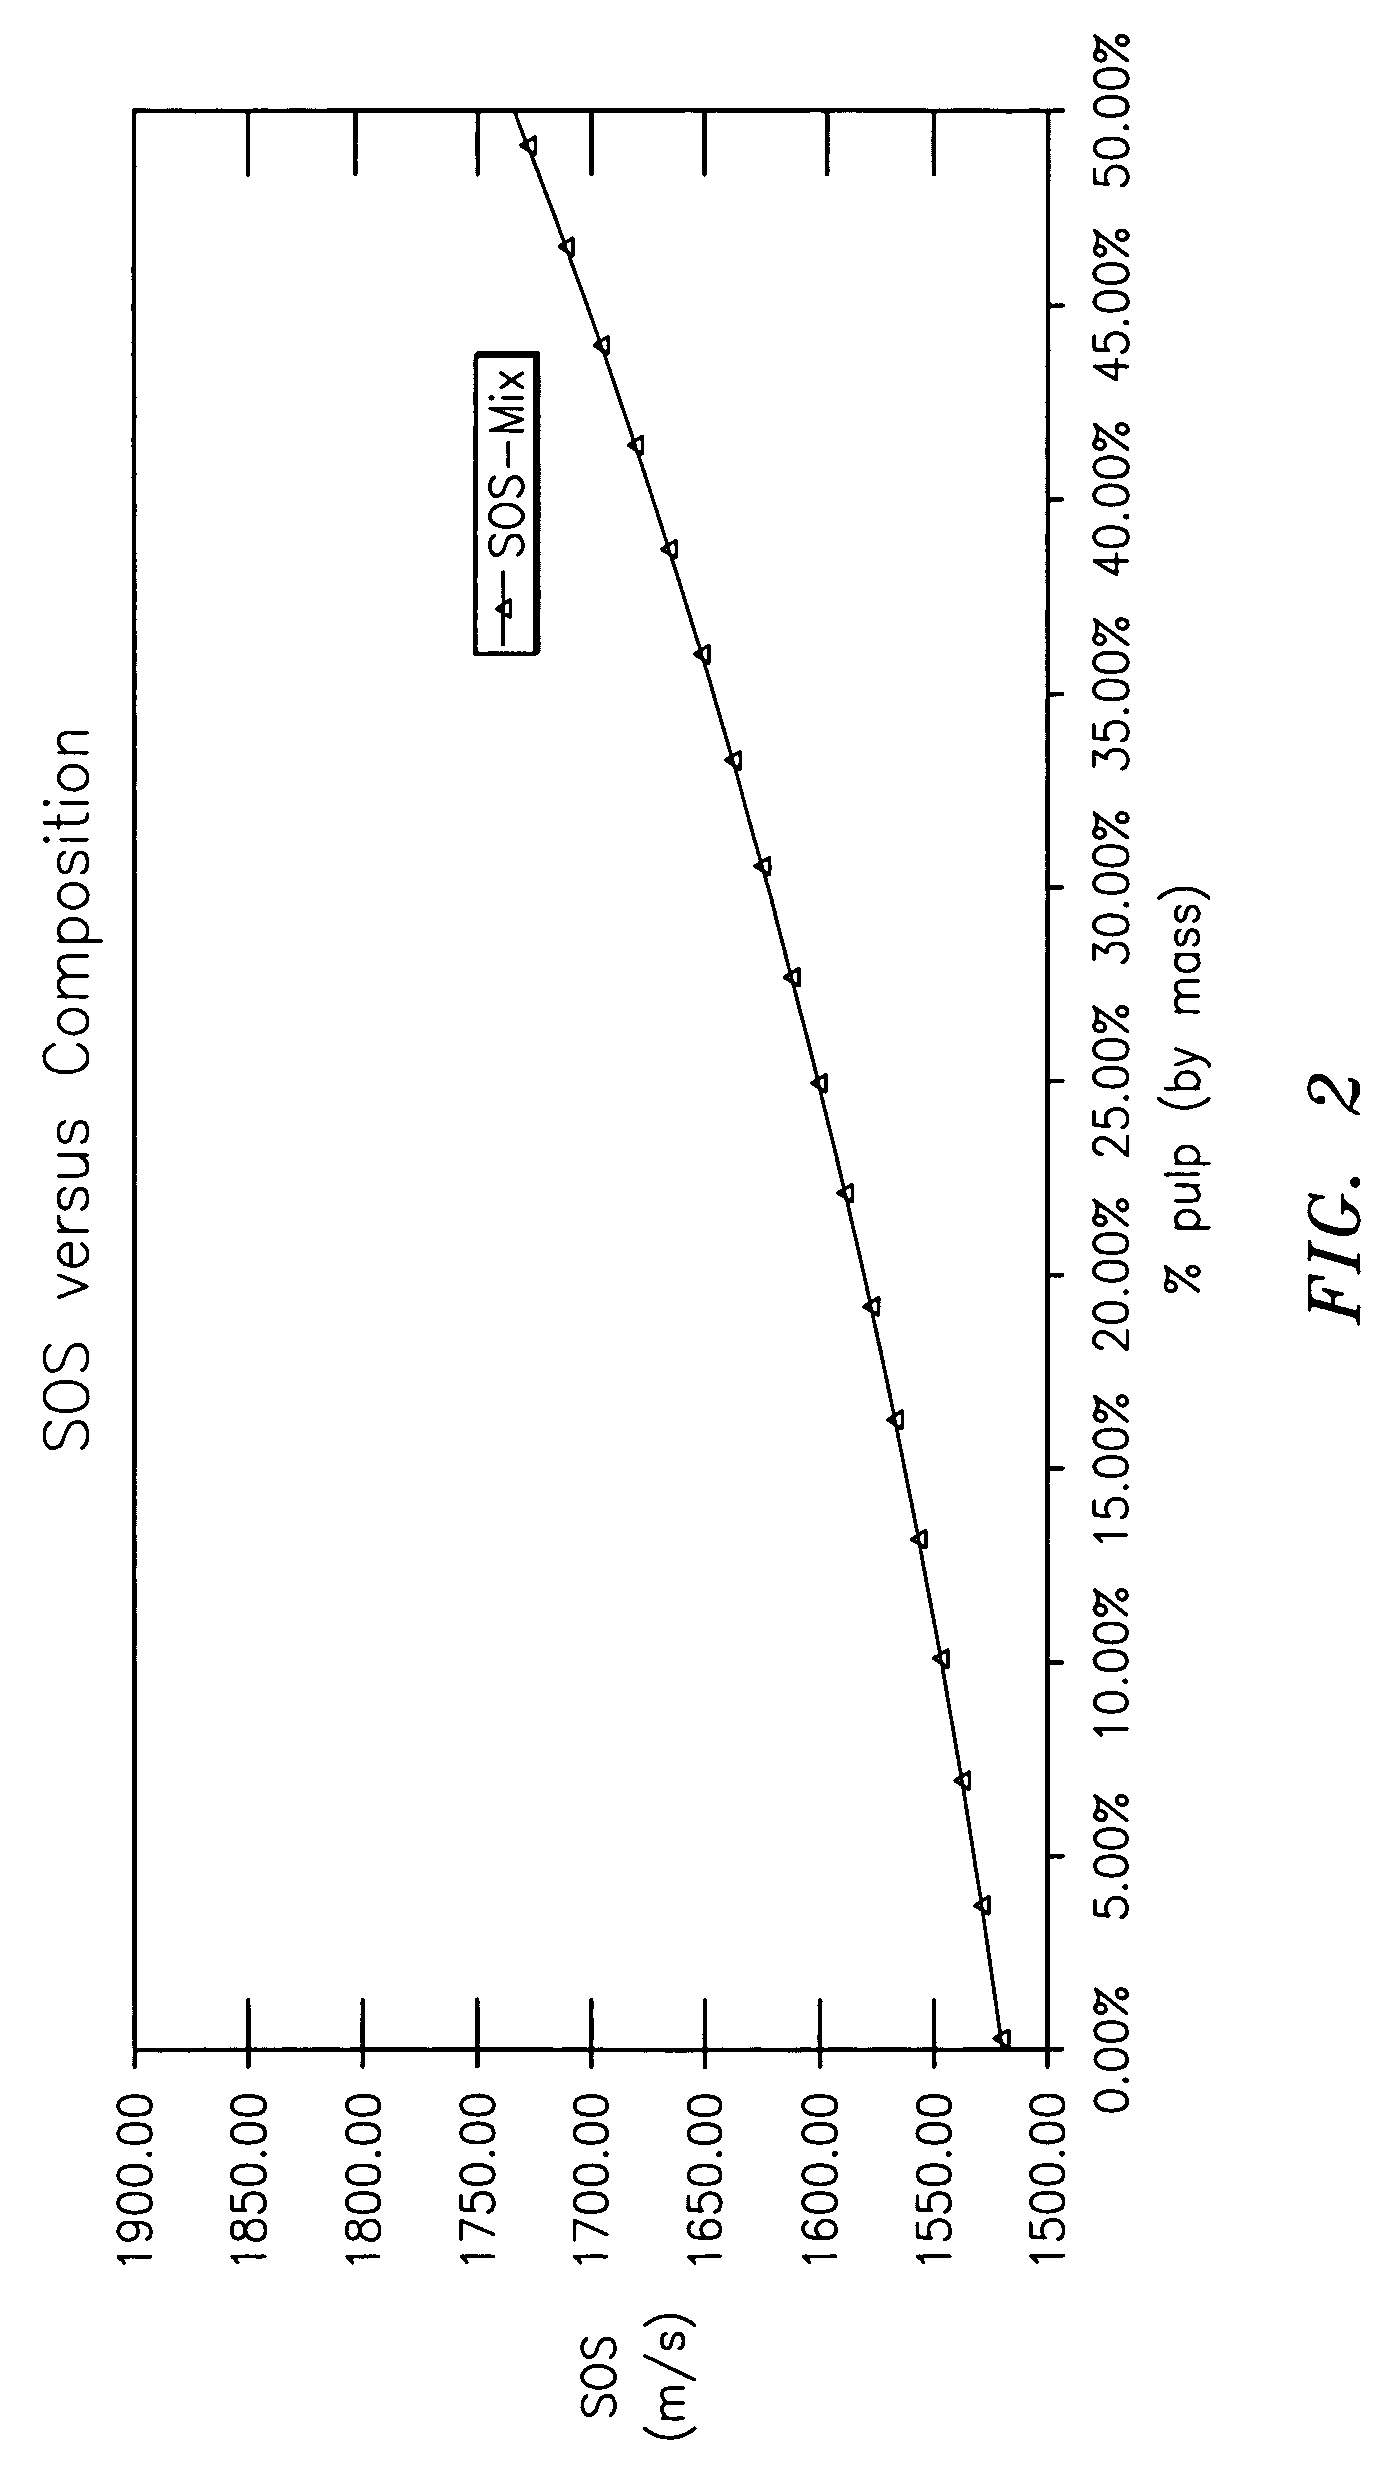 Apparatus and method for measuring multi-Phase flows in pulp and paper industry applications